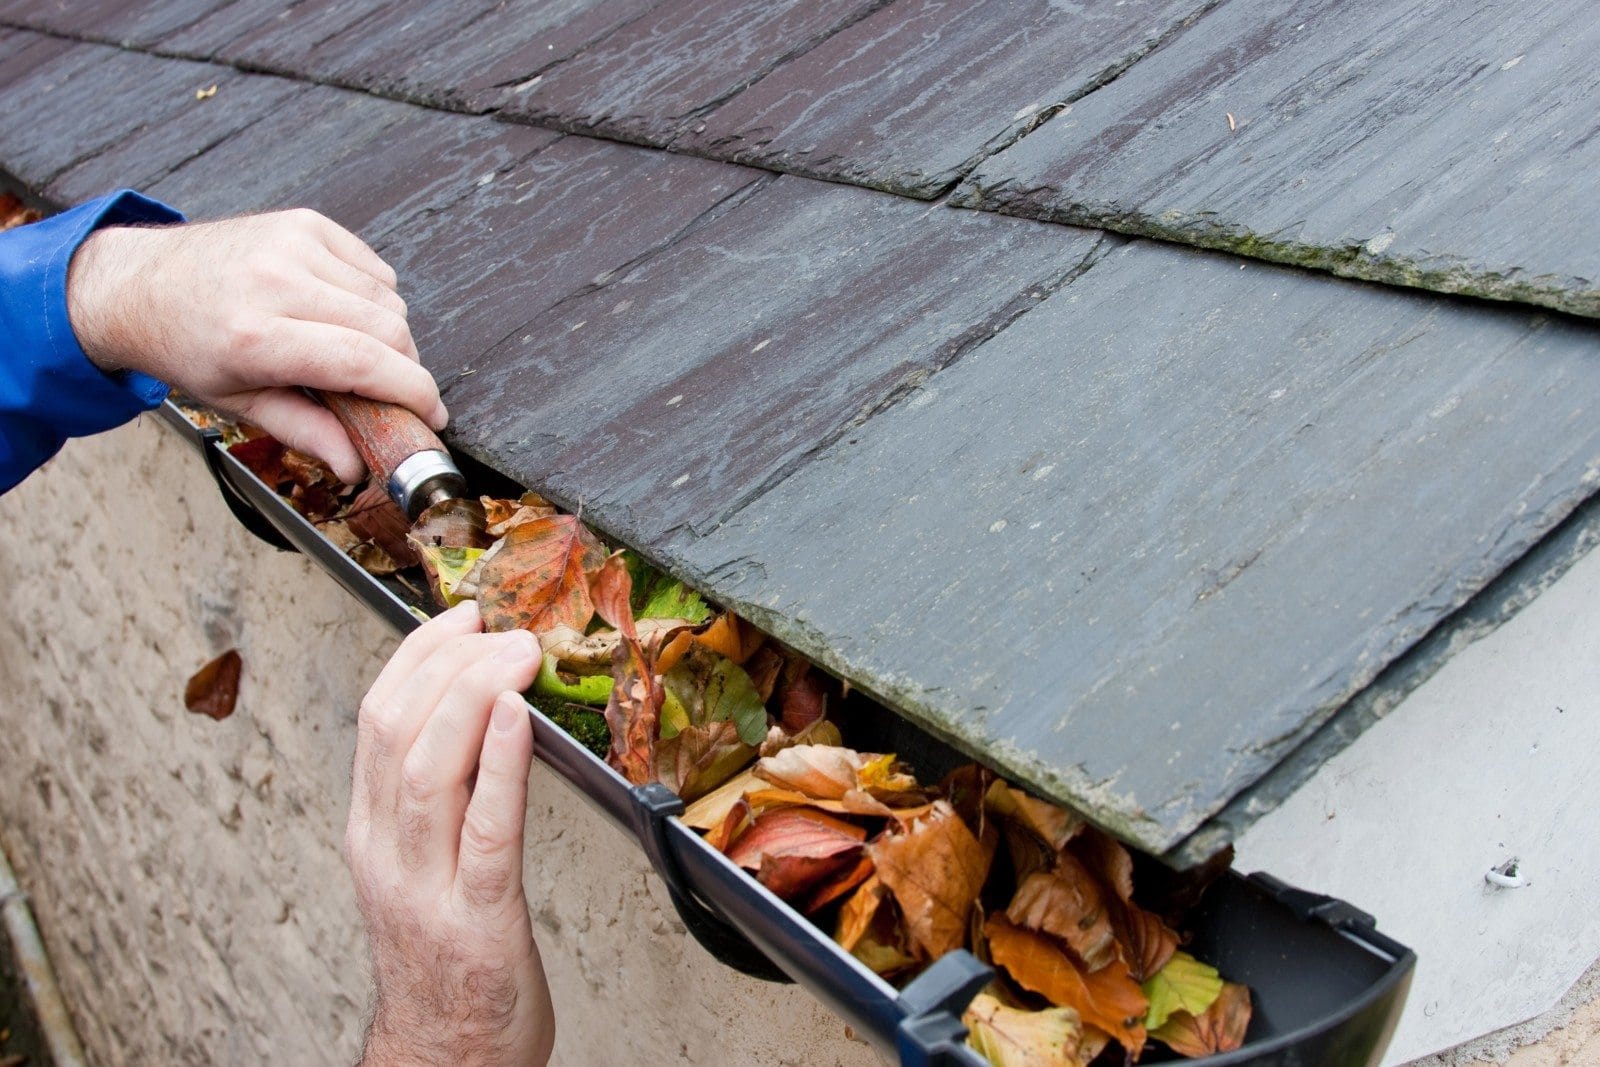 10 overlooked home projects - cleaning leaves from the gutters.